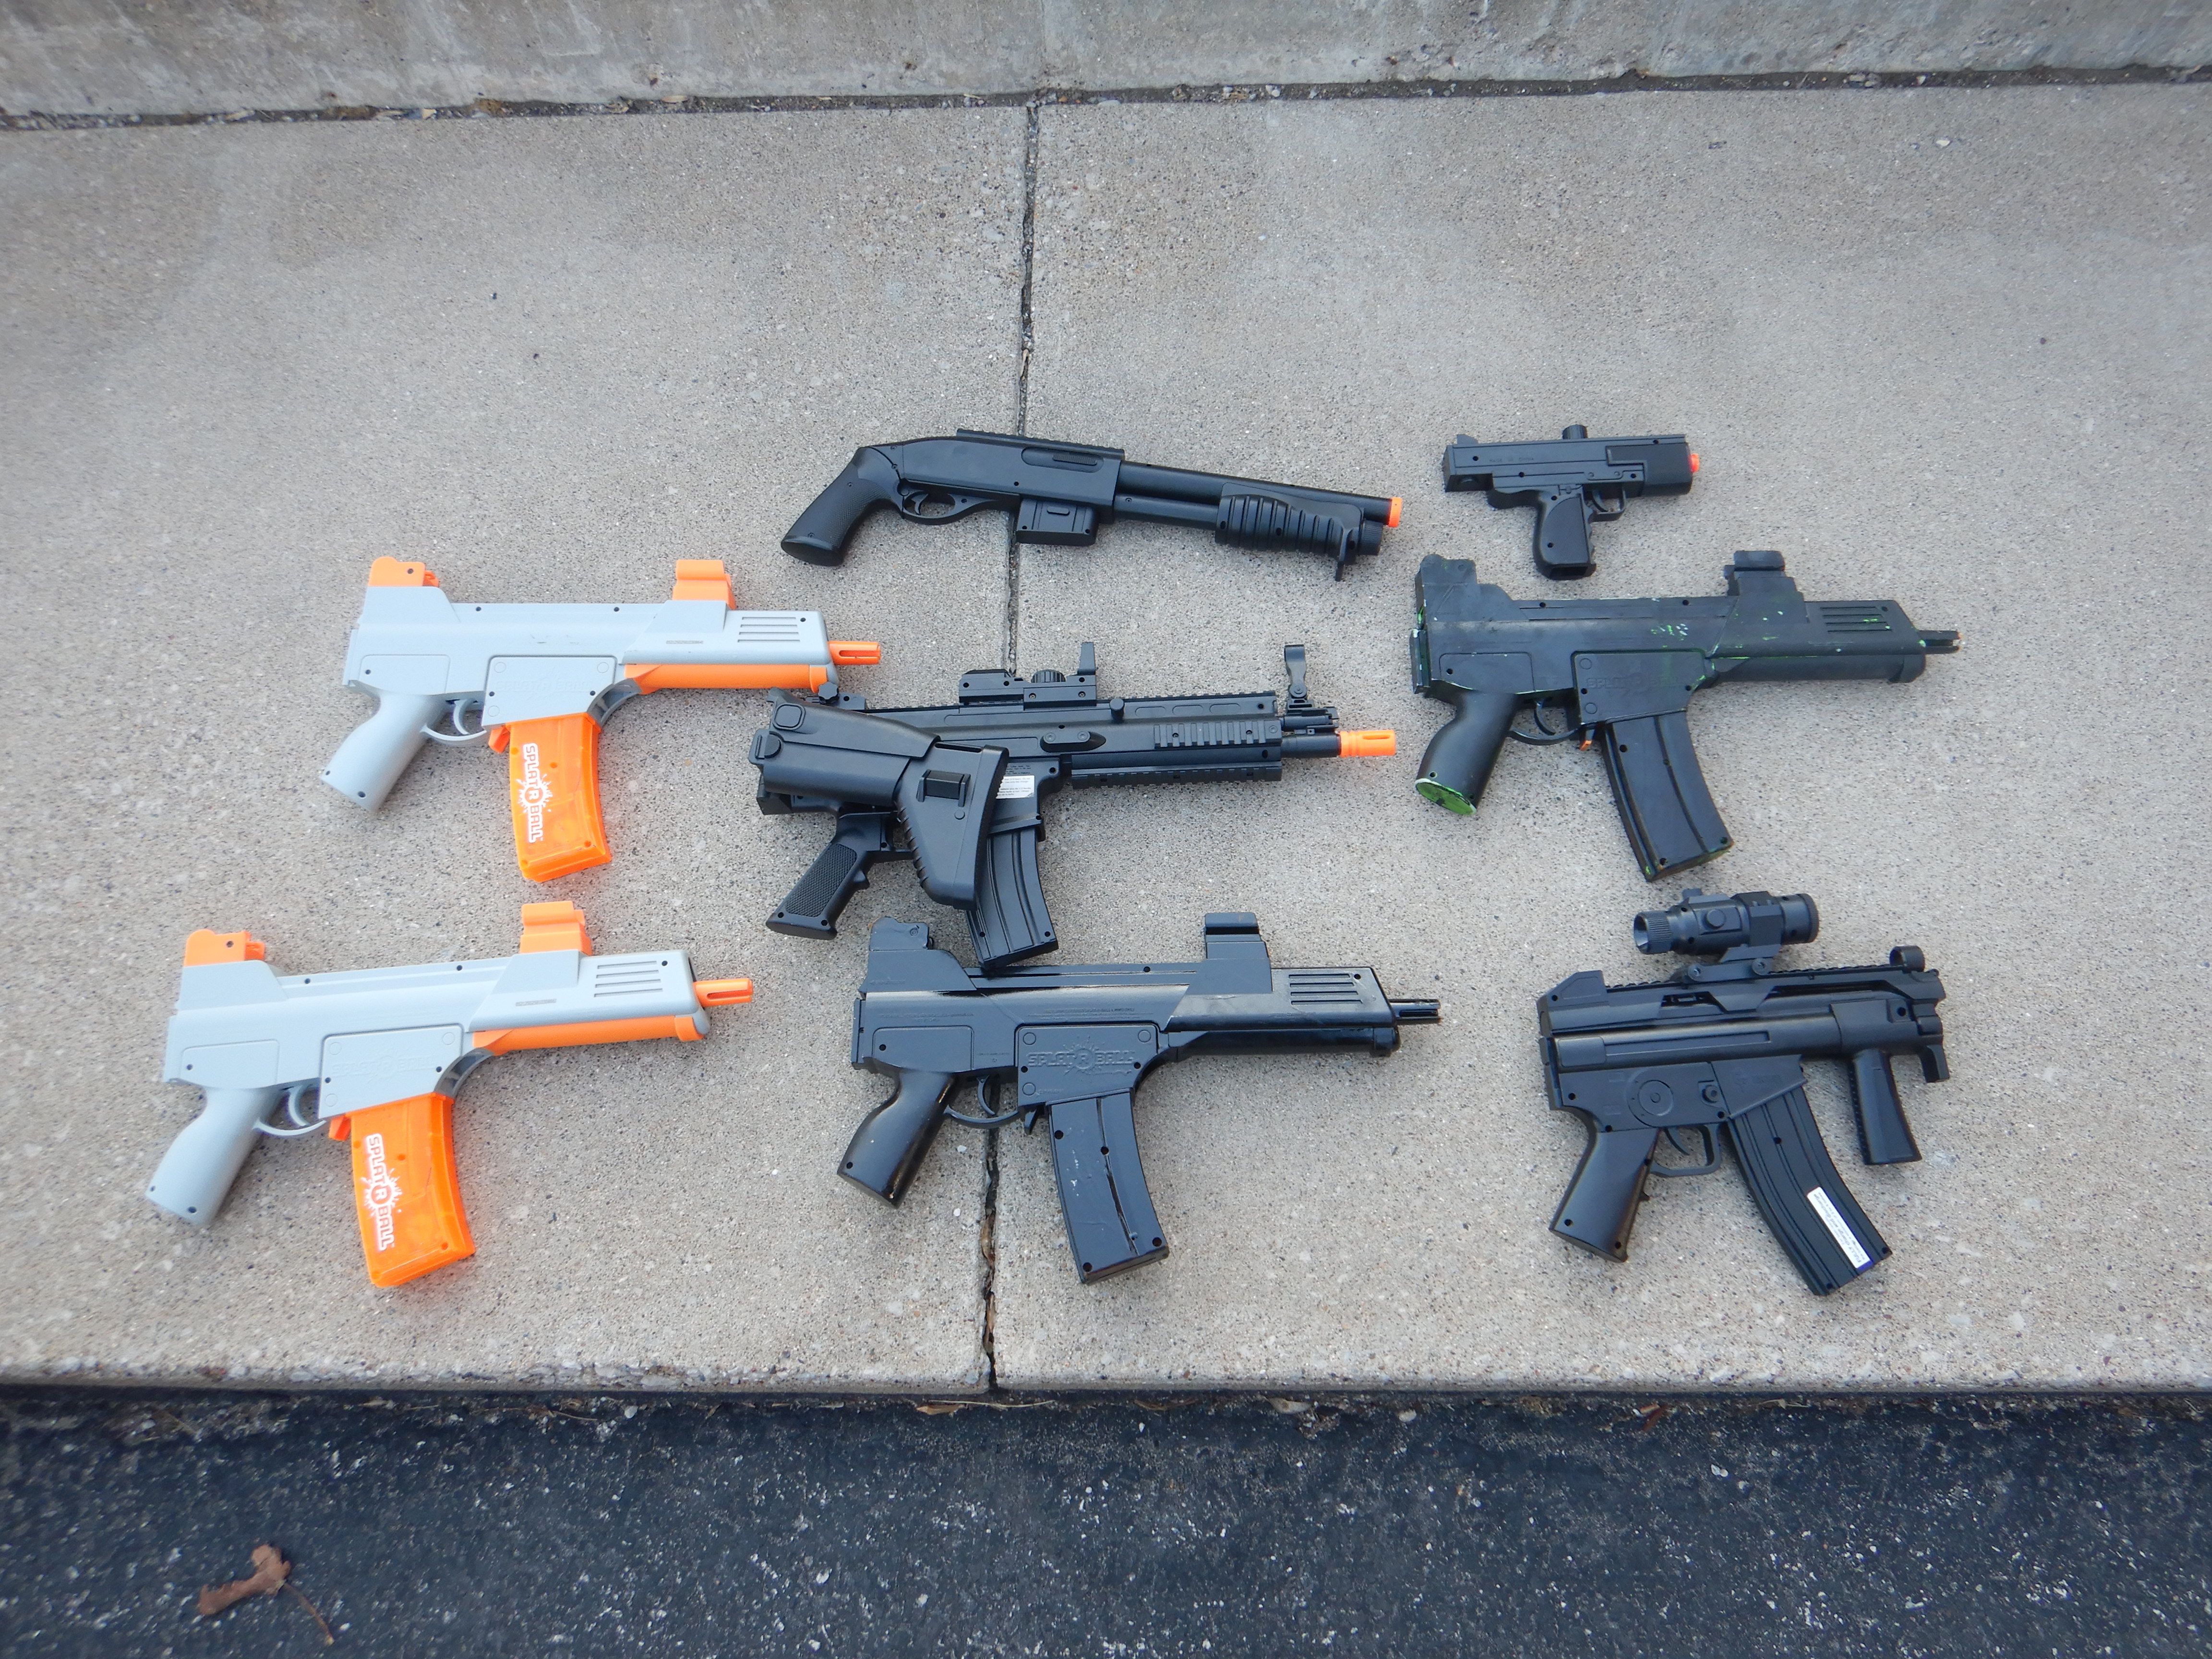 Hannibal Police warn about altered airsoft guns